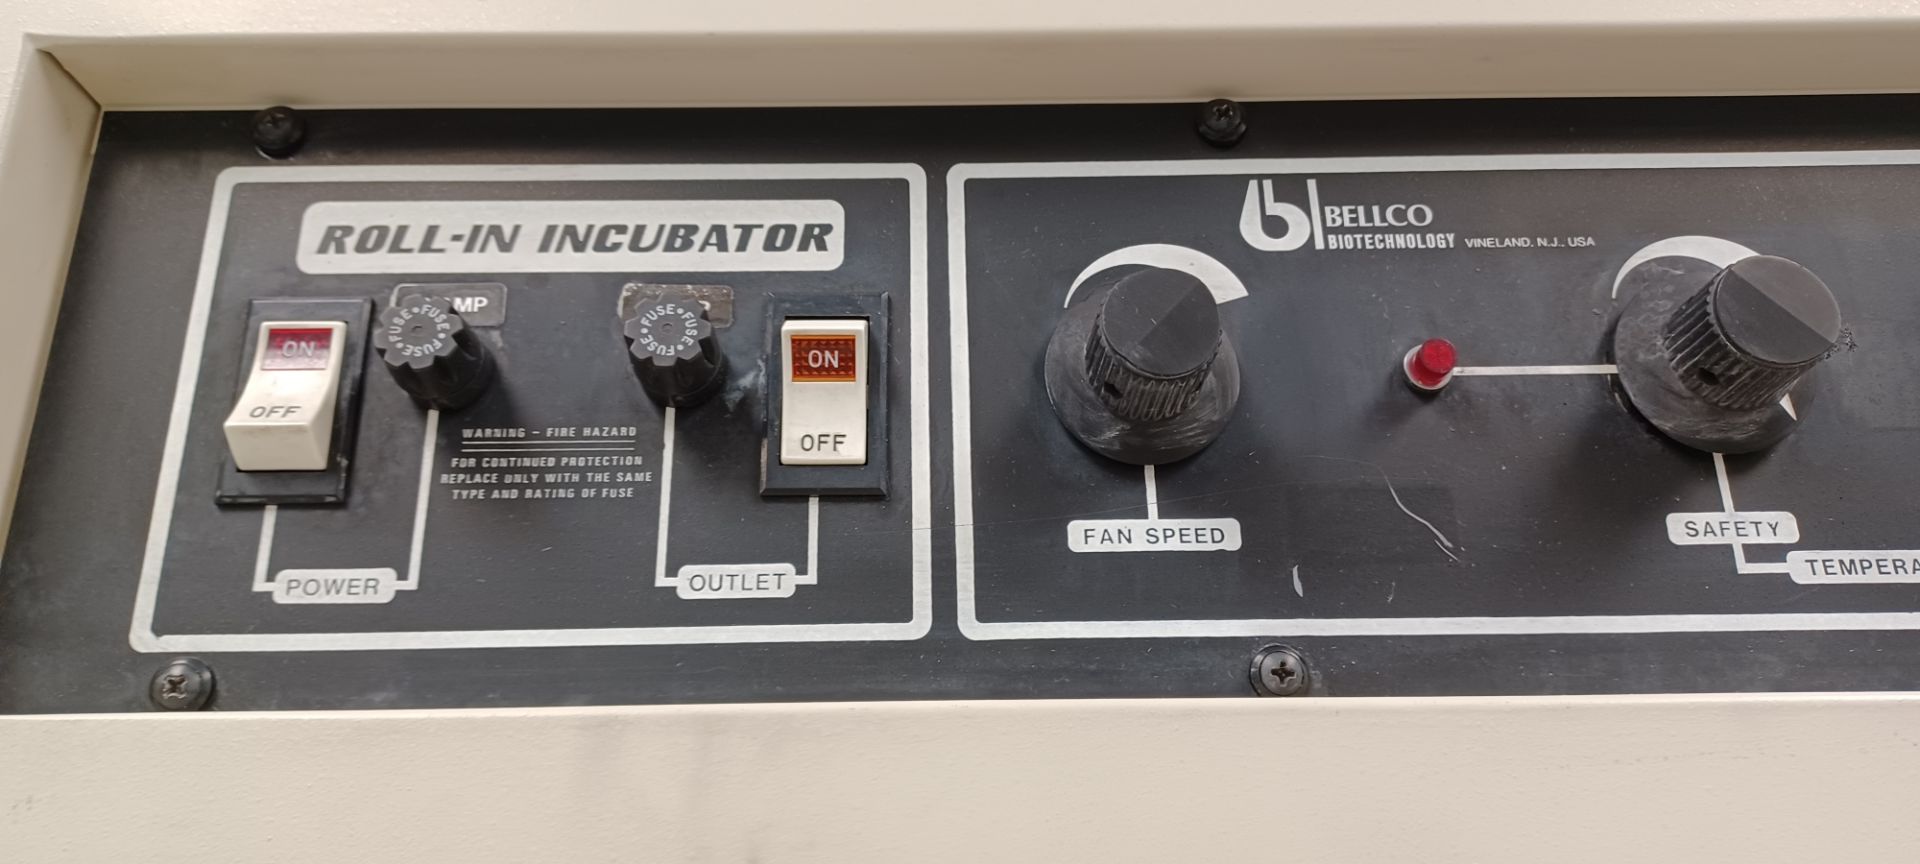 BELLCO BIOTECHNOLOGY ROLL-IN INCUBATOR, CALIBRATED TIL 3/2023 - Image 4 of 6